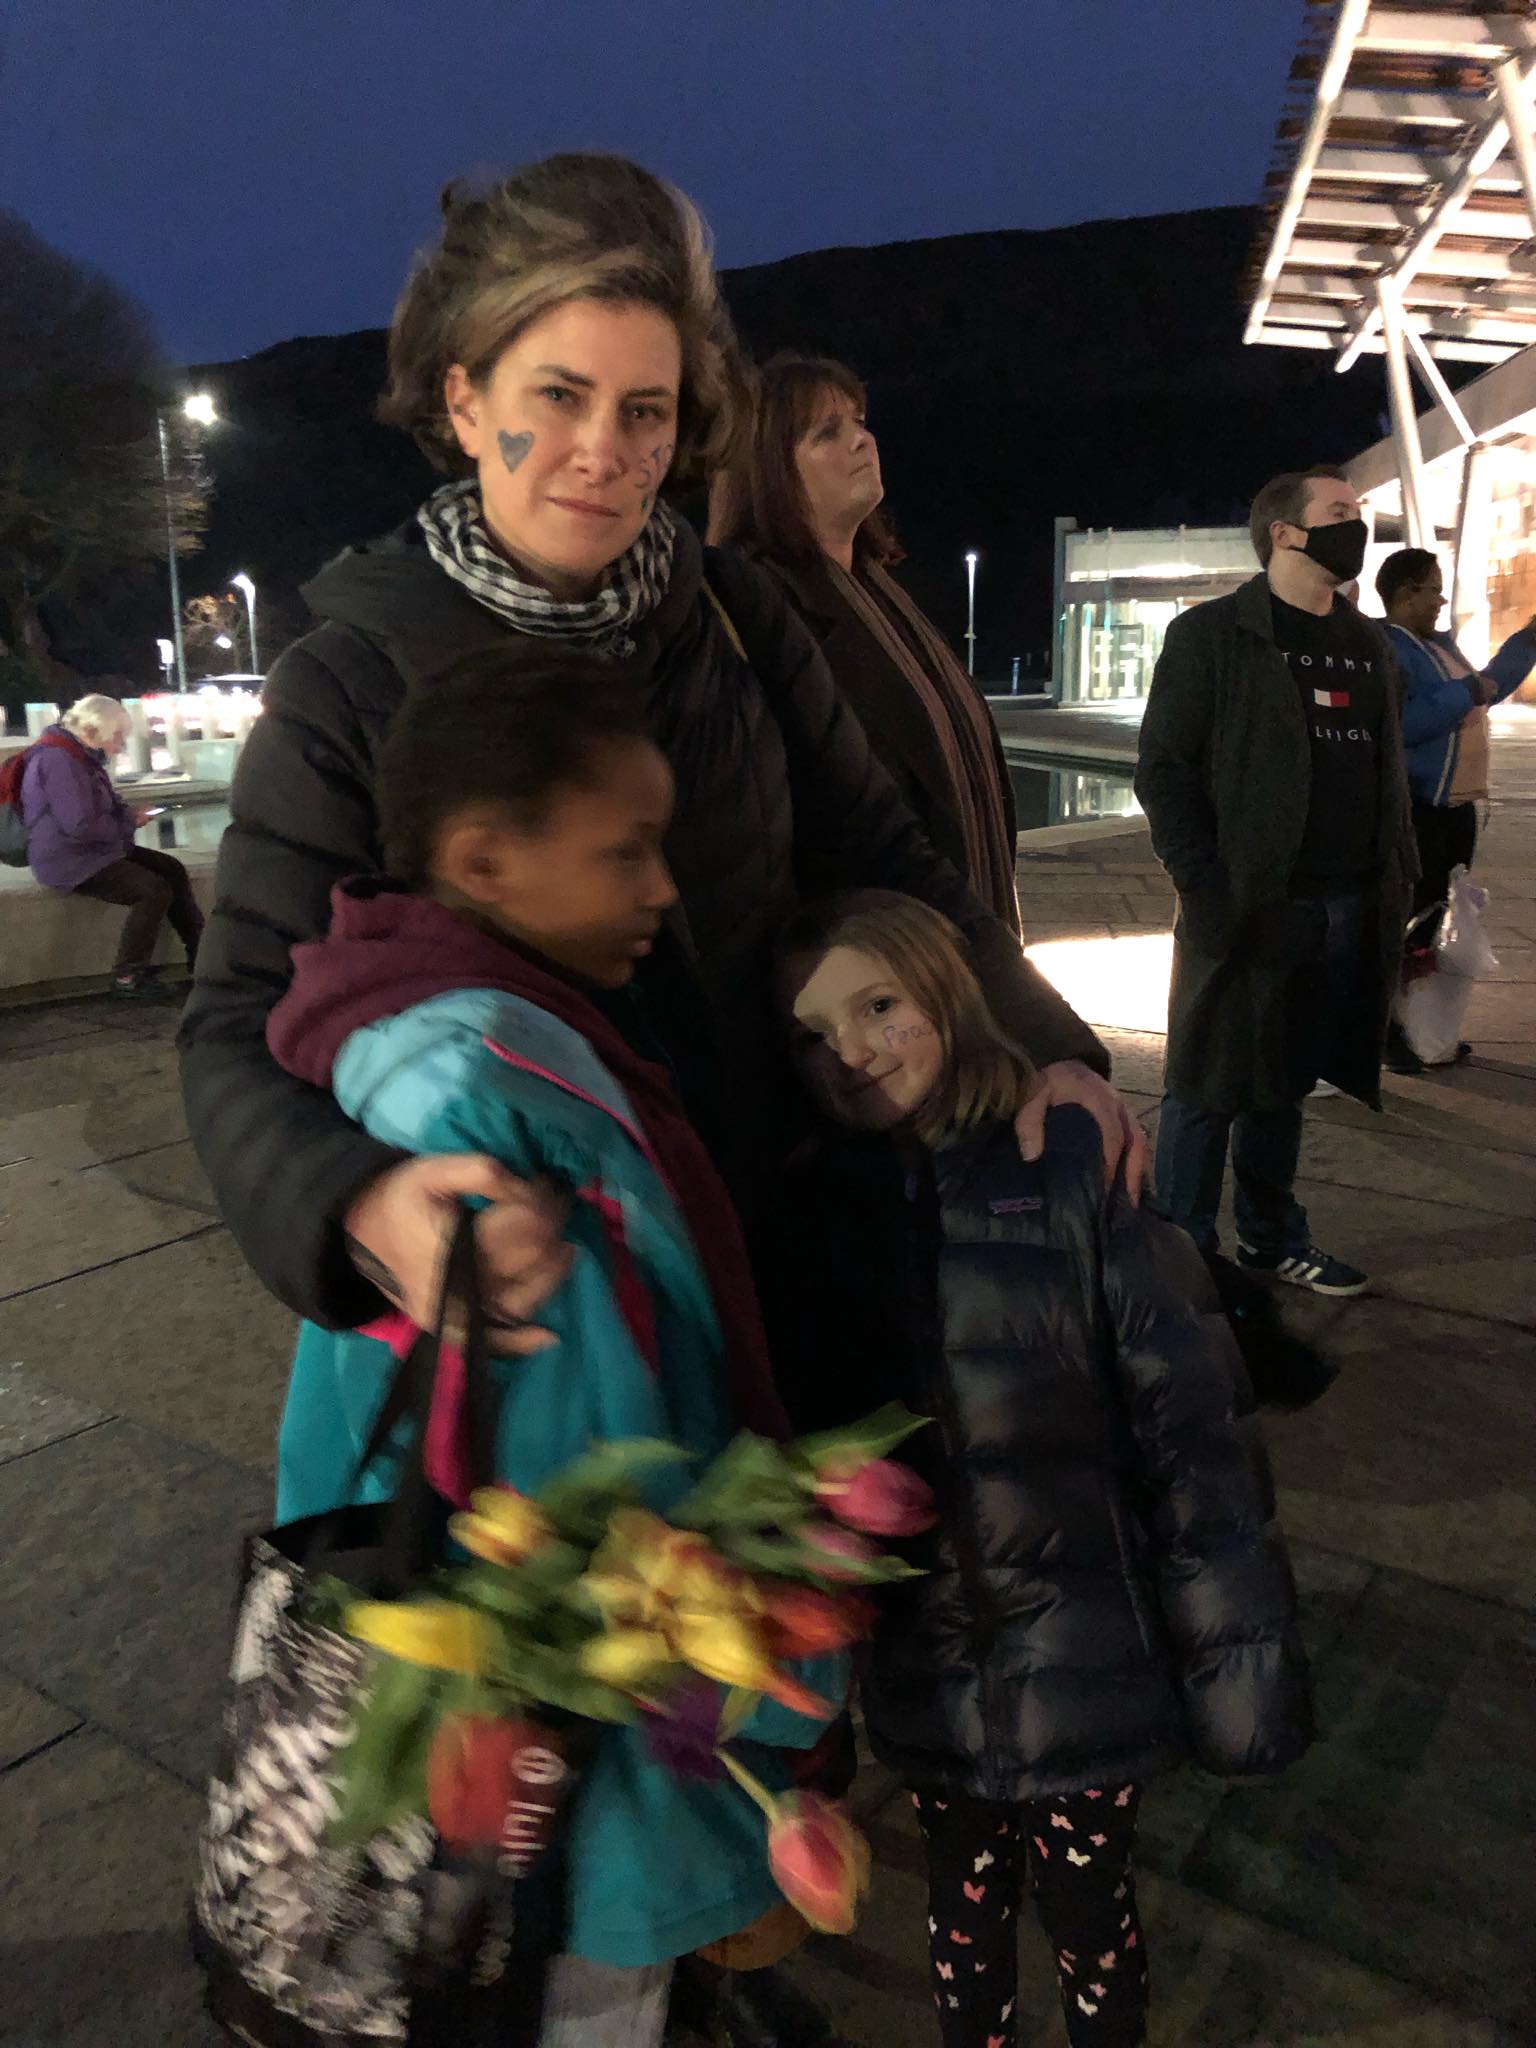 Tribute: Some demonstrators brought children to the vigil.